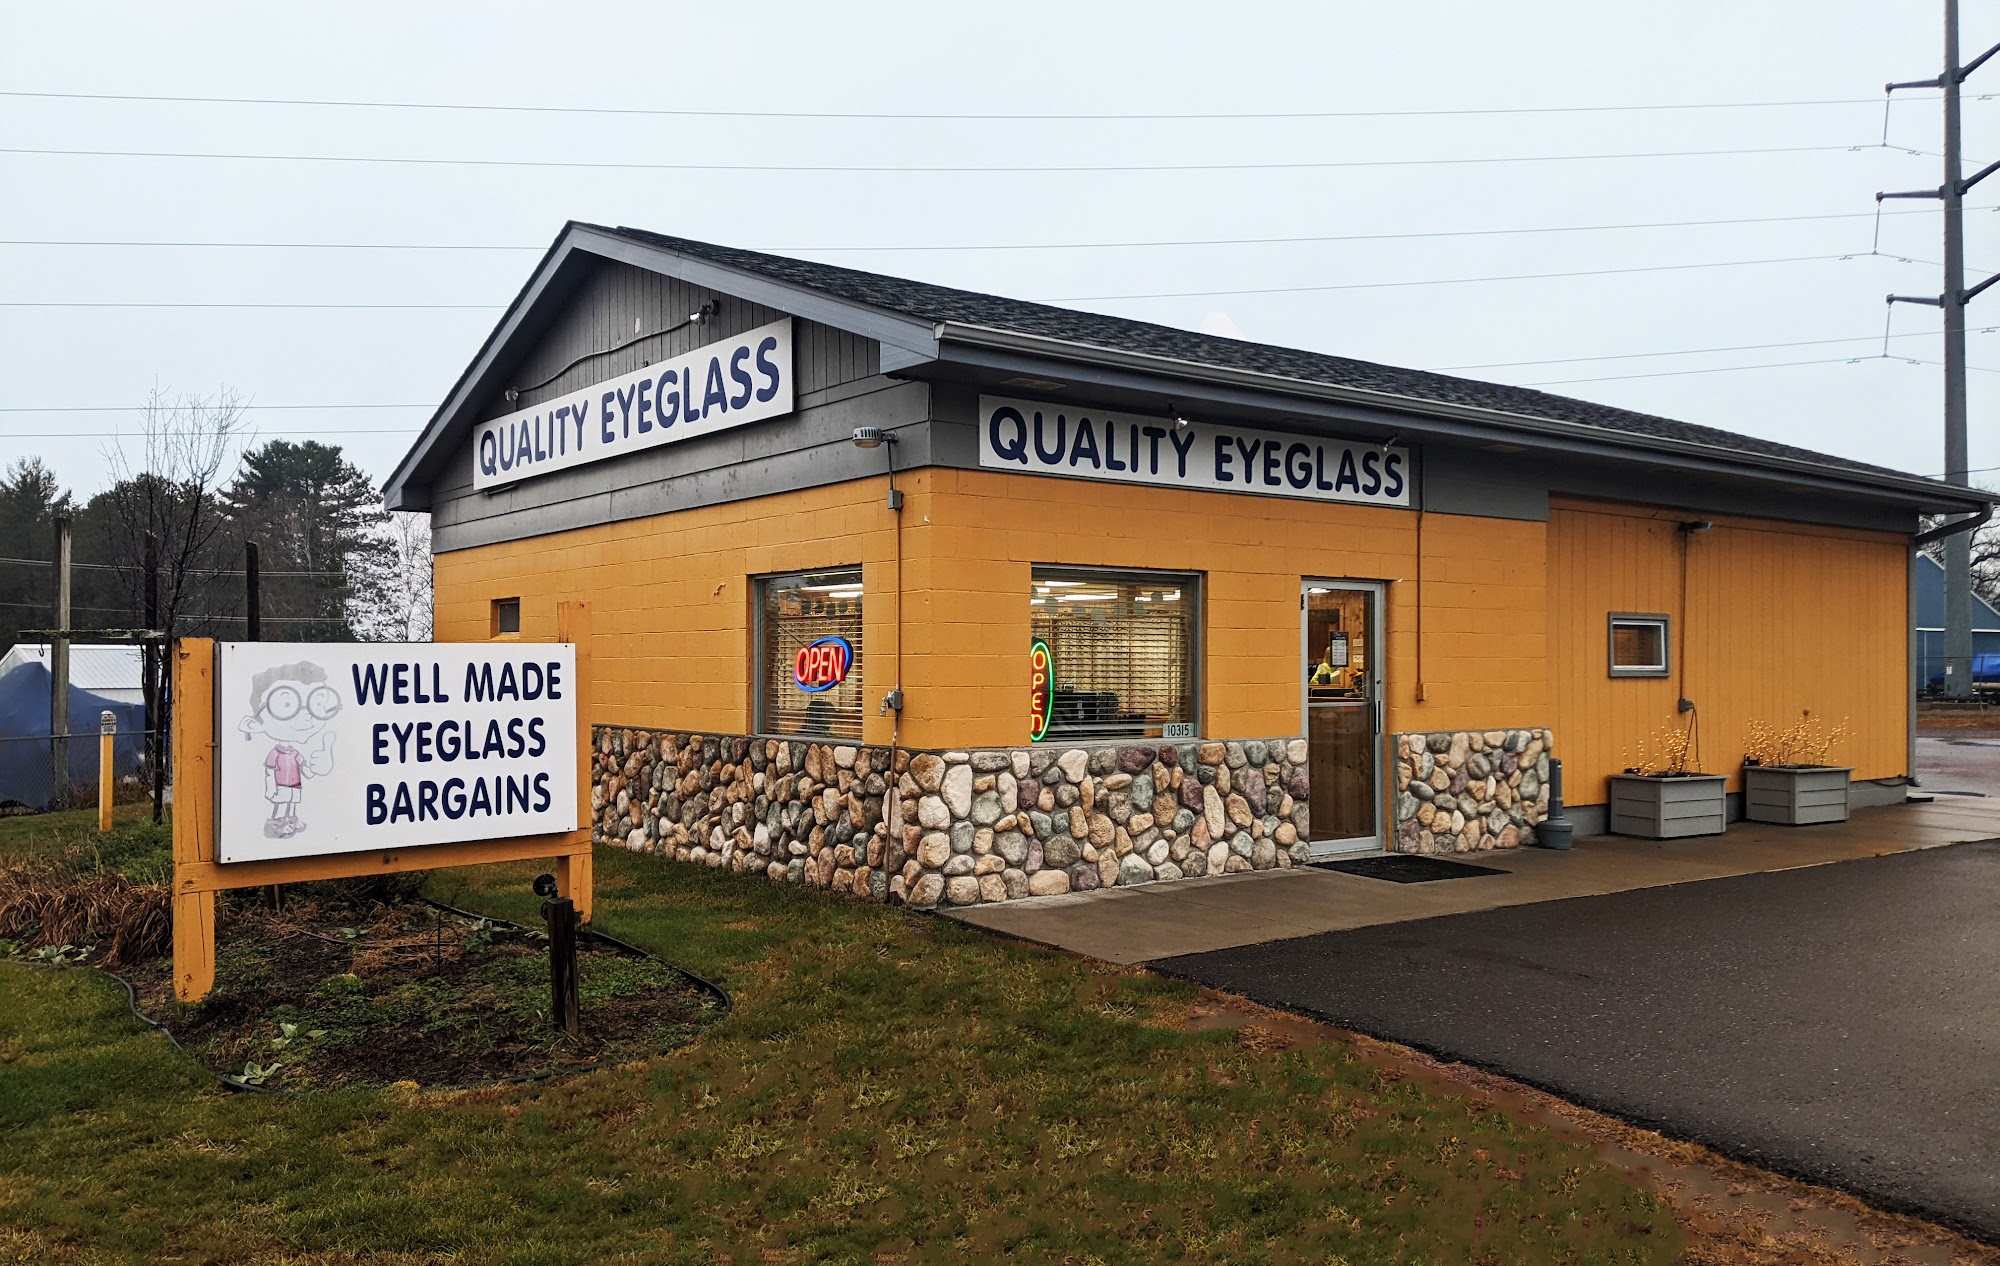 Quality Eyeglass Outlet 10315 S Florida Ave, Hayward Wisconsin 54843